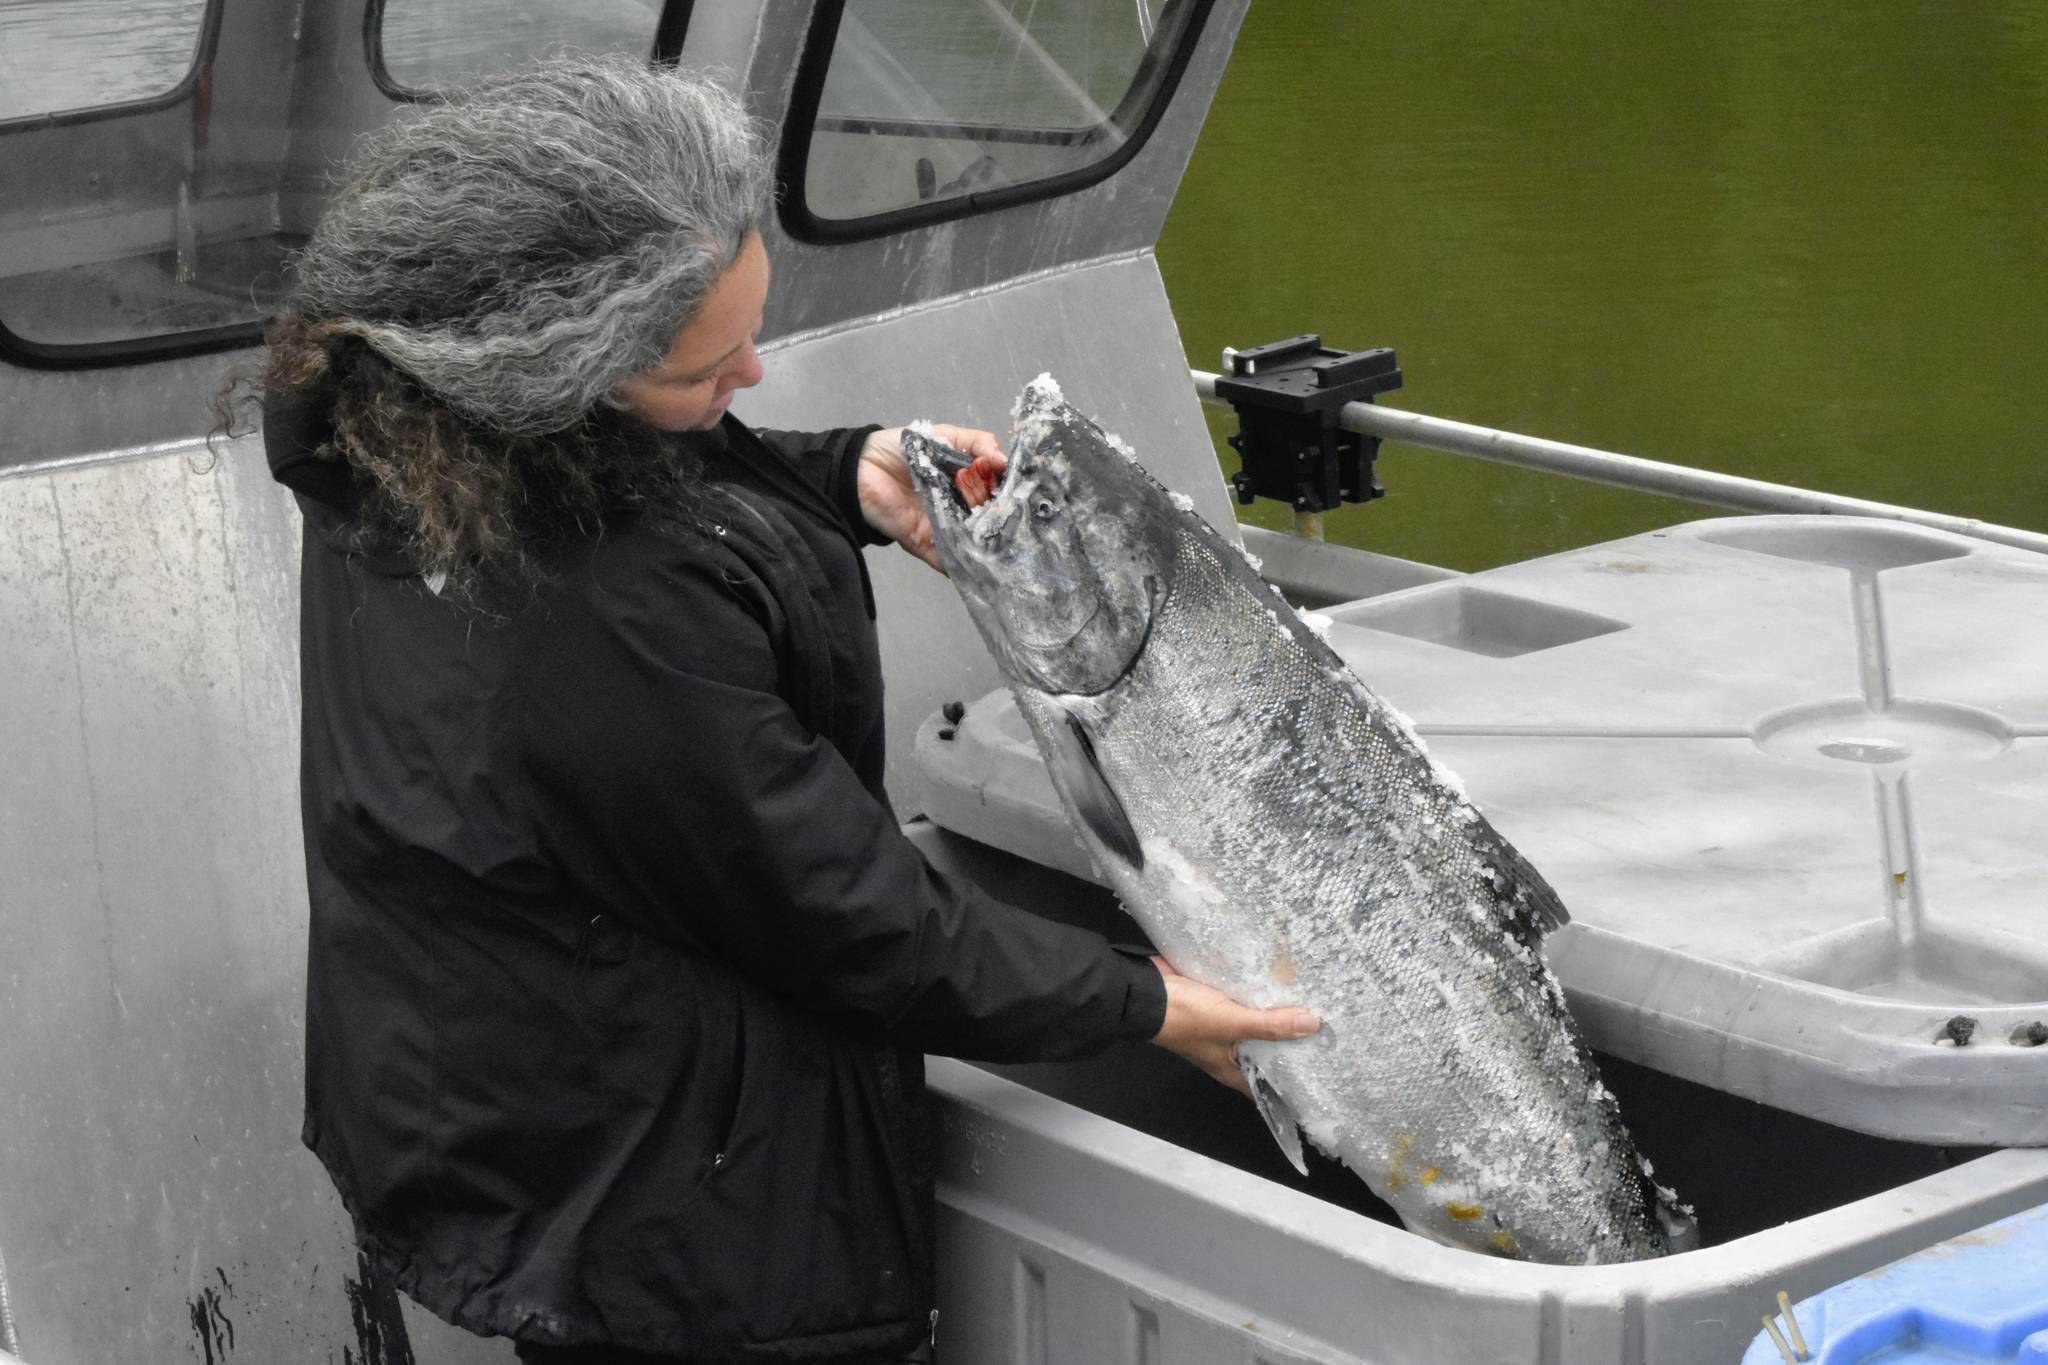 Shona Osterhout holds up a 26-pound king salmon turned into the Mike Pusich Douglas Harbor weigh station for the 75th annual Golden North Salmon Derby on Saturday, Aug. 14, 2021. Osterhout, a derby volunteer, said at the time the fish was leading the derby. (Peter Segall / Juneau Empire)